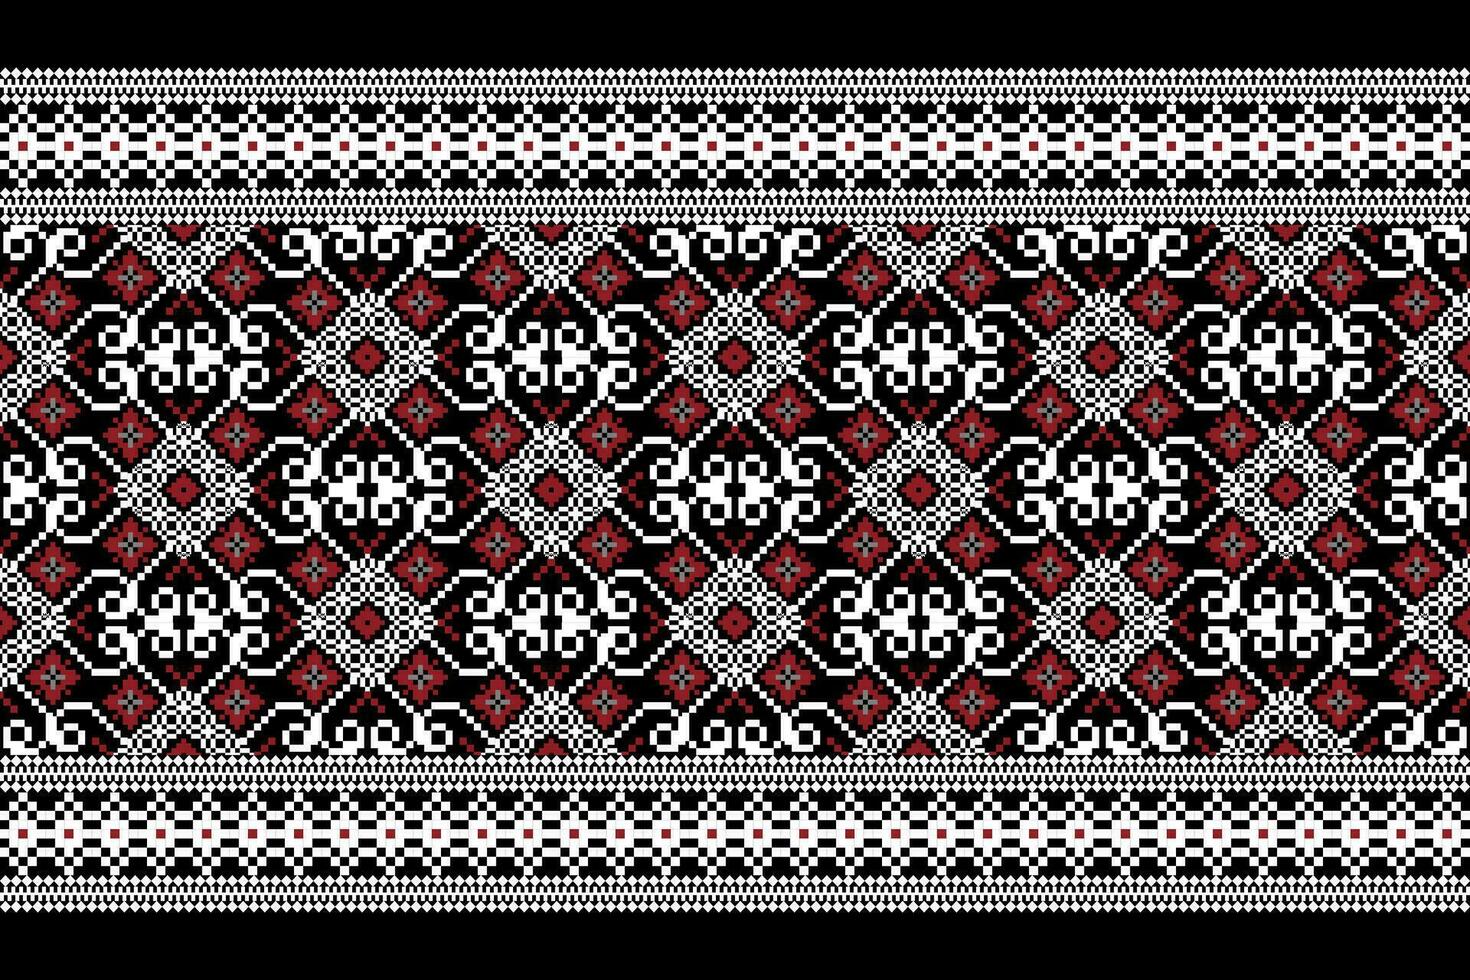 Floral Cross Stitch Embroidery on black background.geometric ethnic oriental pattern traditional.Aztec style abstract vector illustration.design for texture,fabric,clothing,wrapping,decoration,scarf.